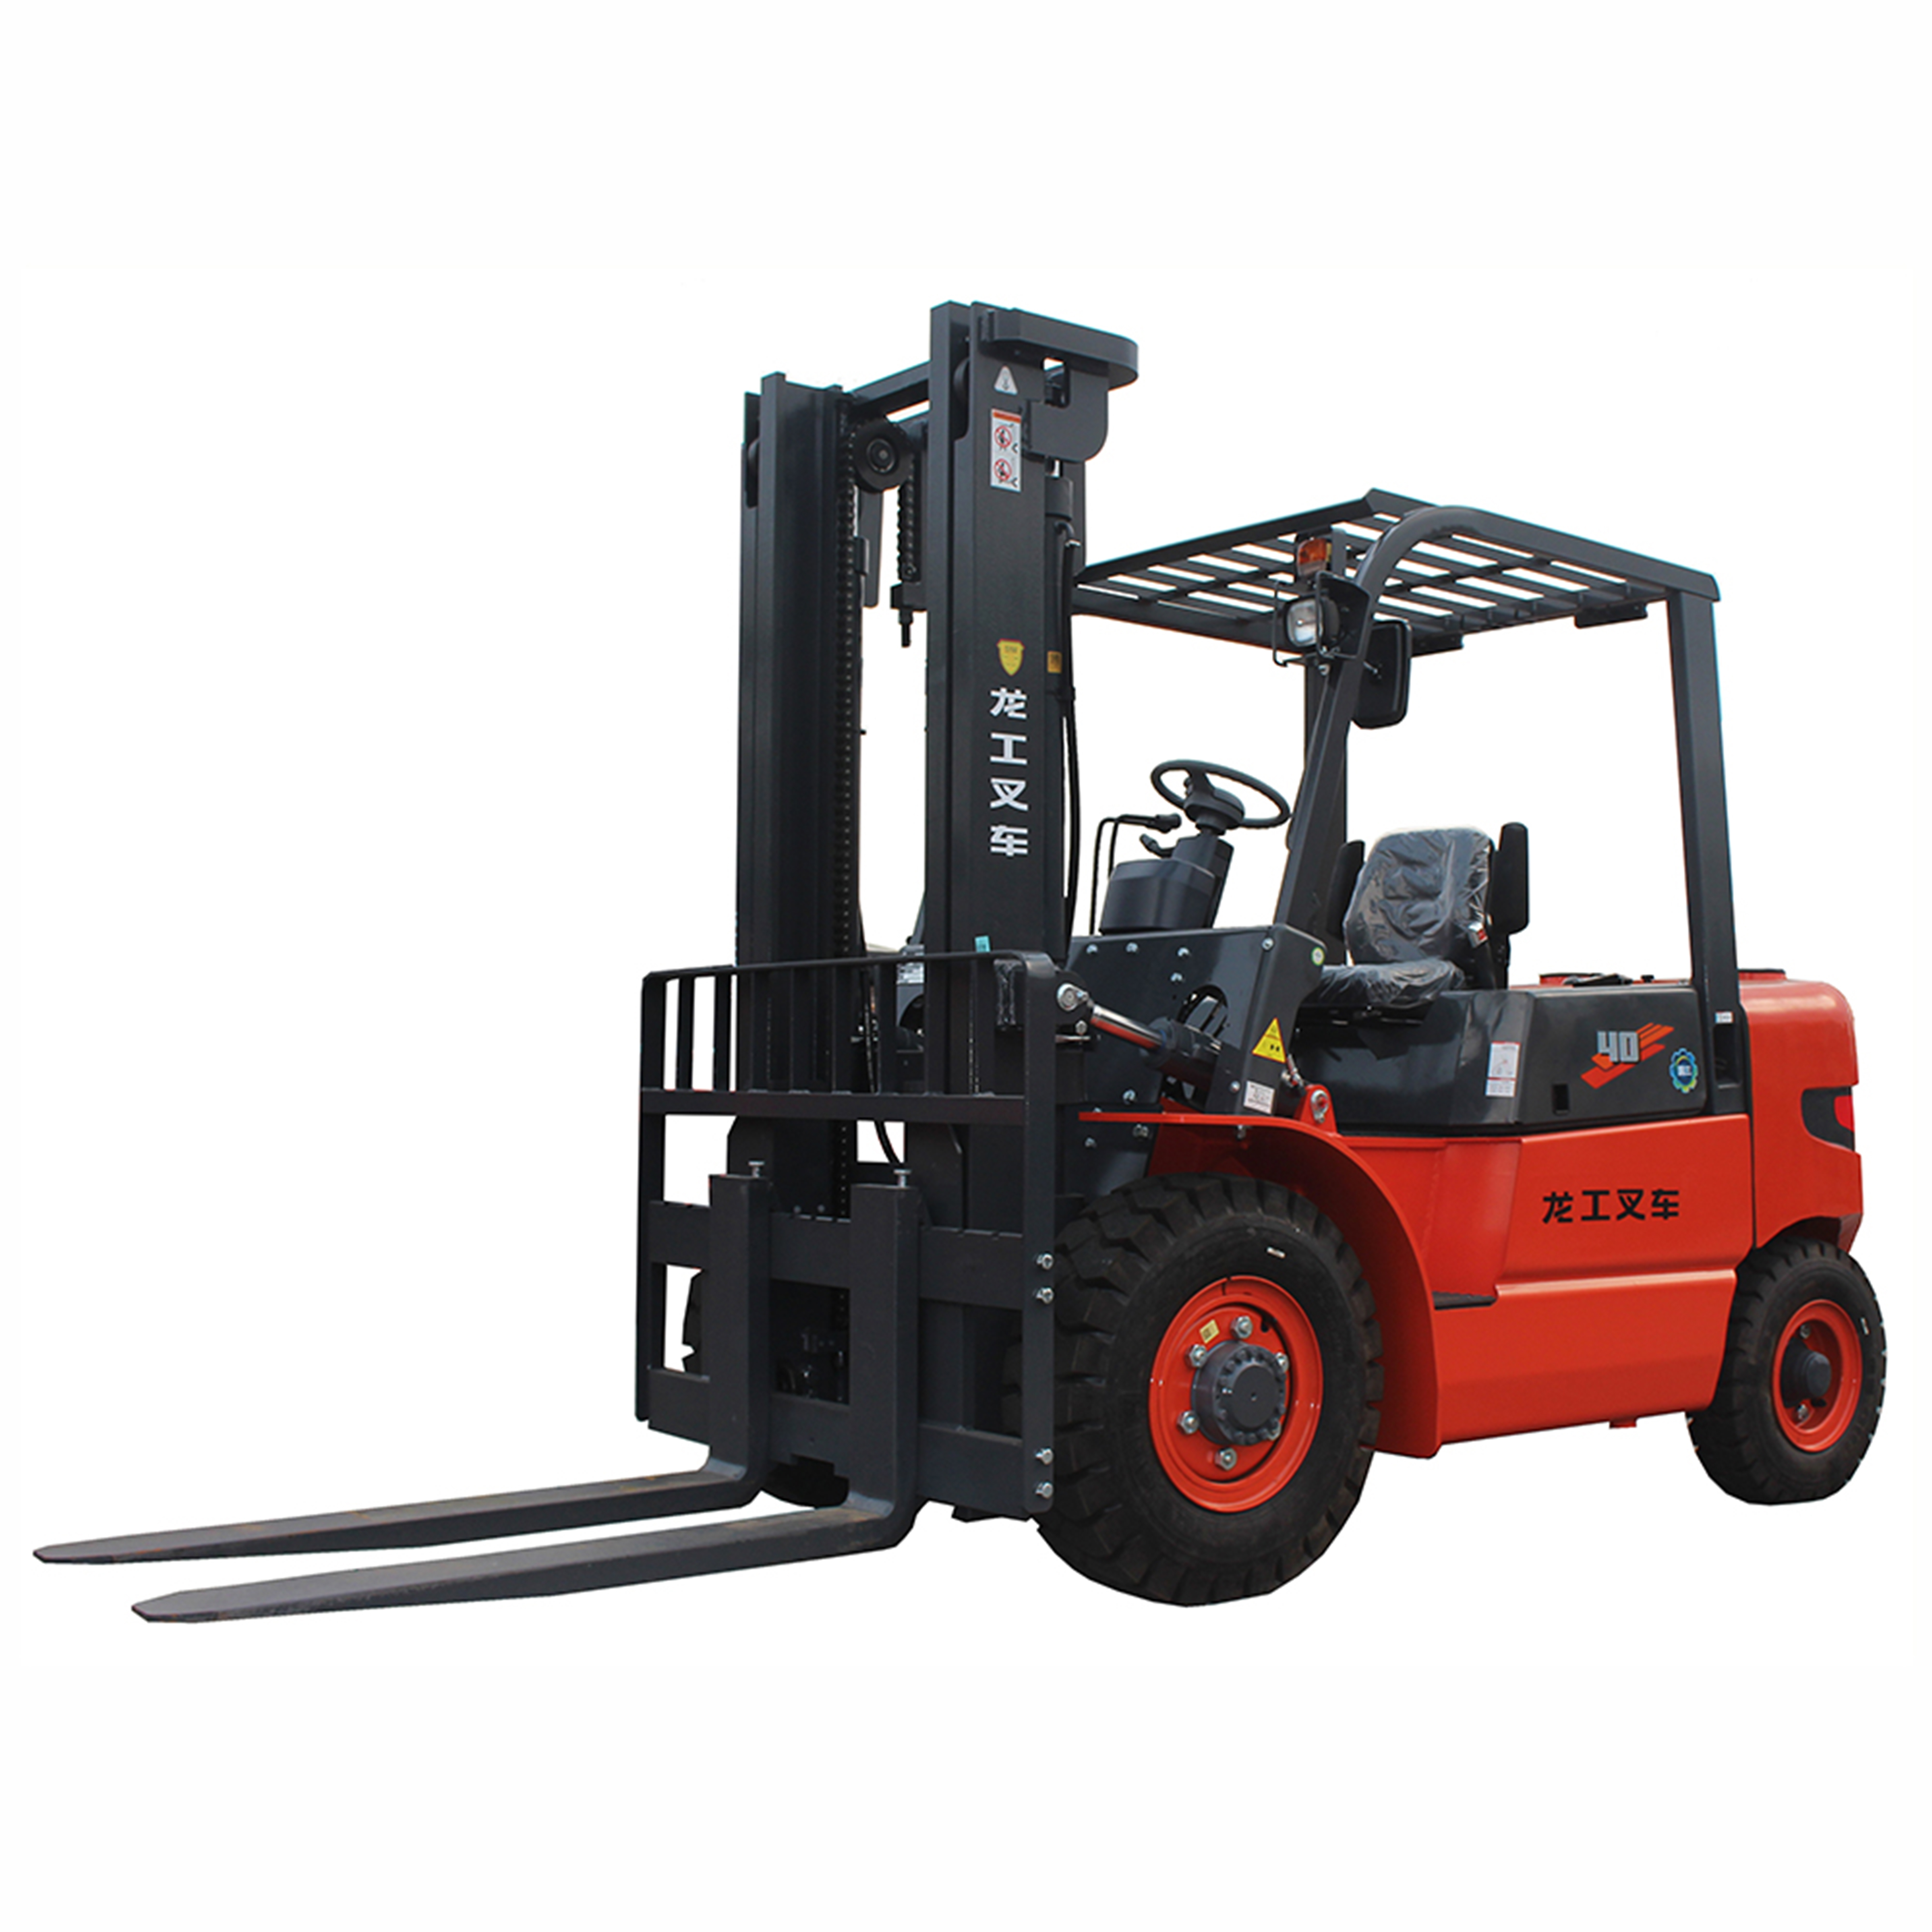 LONKING LG40 4 ton portable china narrow aisle all terrain diesel forklift Fuel forklift